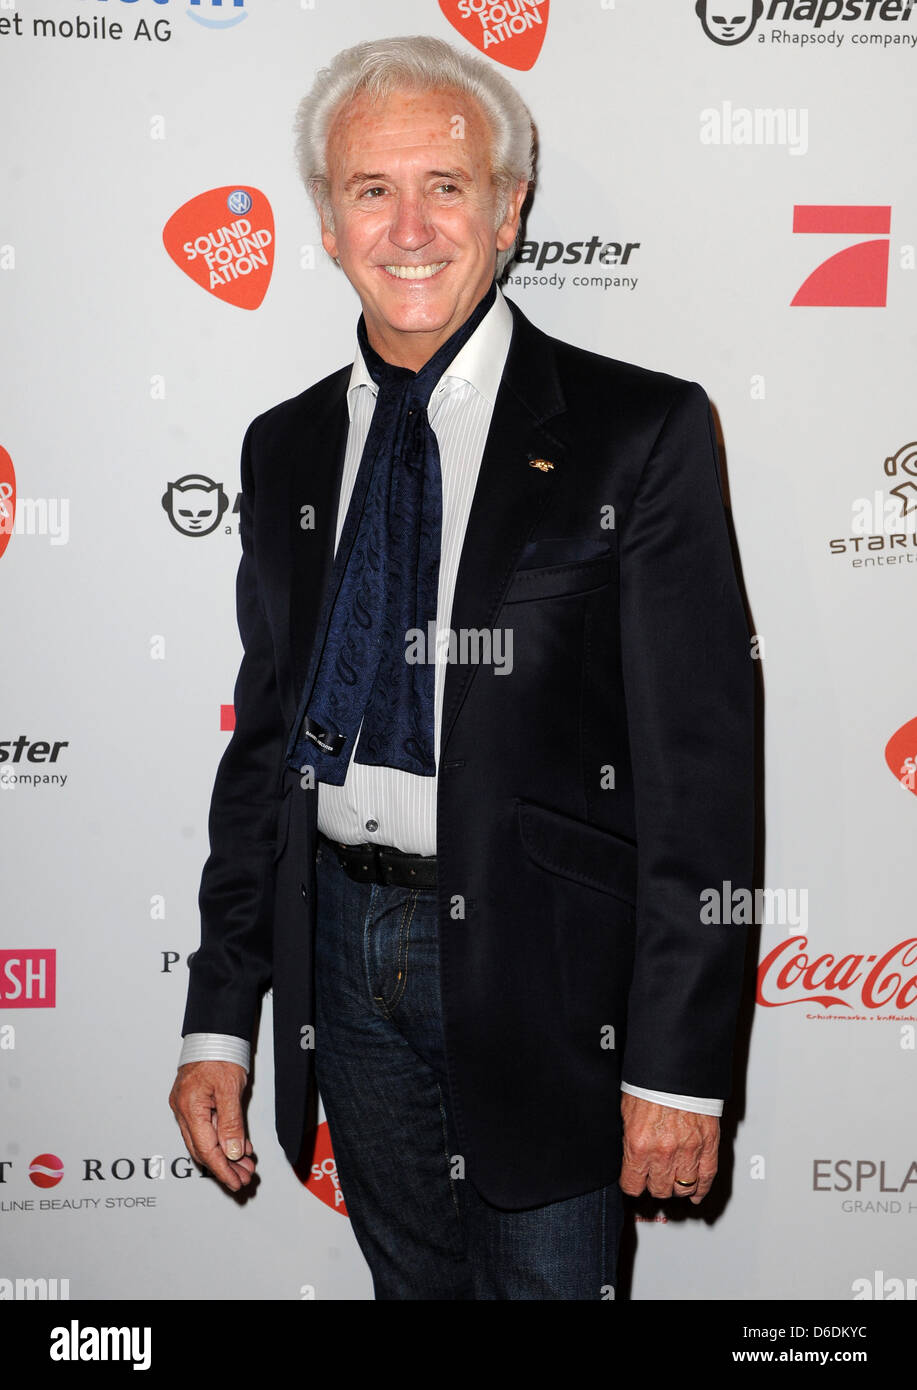 British singer Tony Christie arrives at the 'Music meets Media' event at Grand Hotel Esplanade in Berlin, Germany, 07 September 2012. The industry event takes place during the Berlin Music Week. Photo: Britta Pedersen Stock Photo